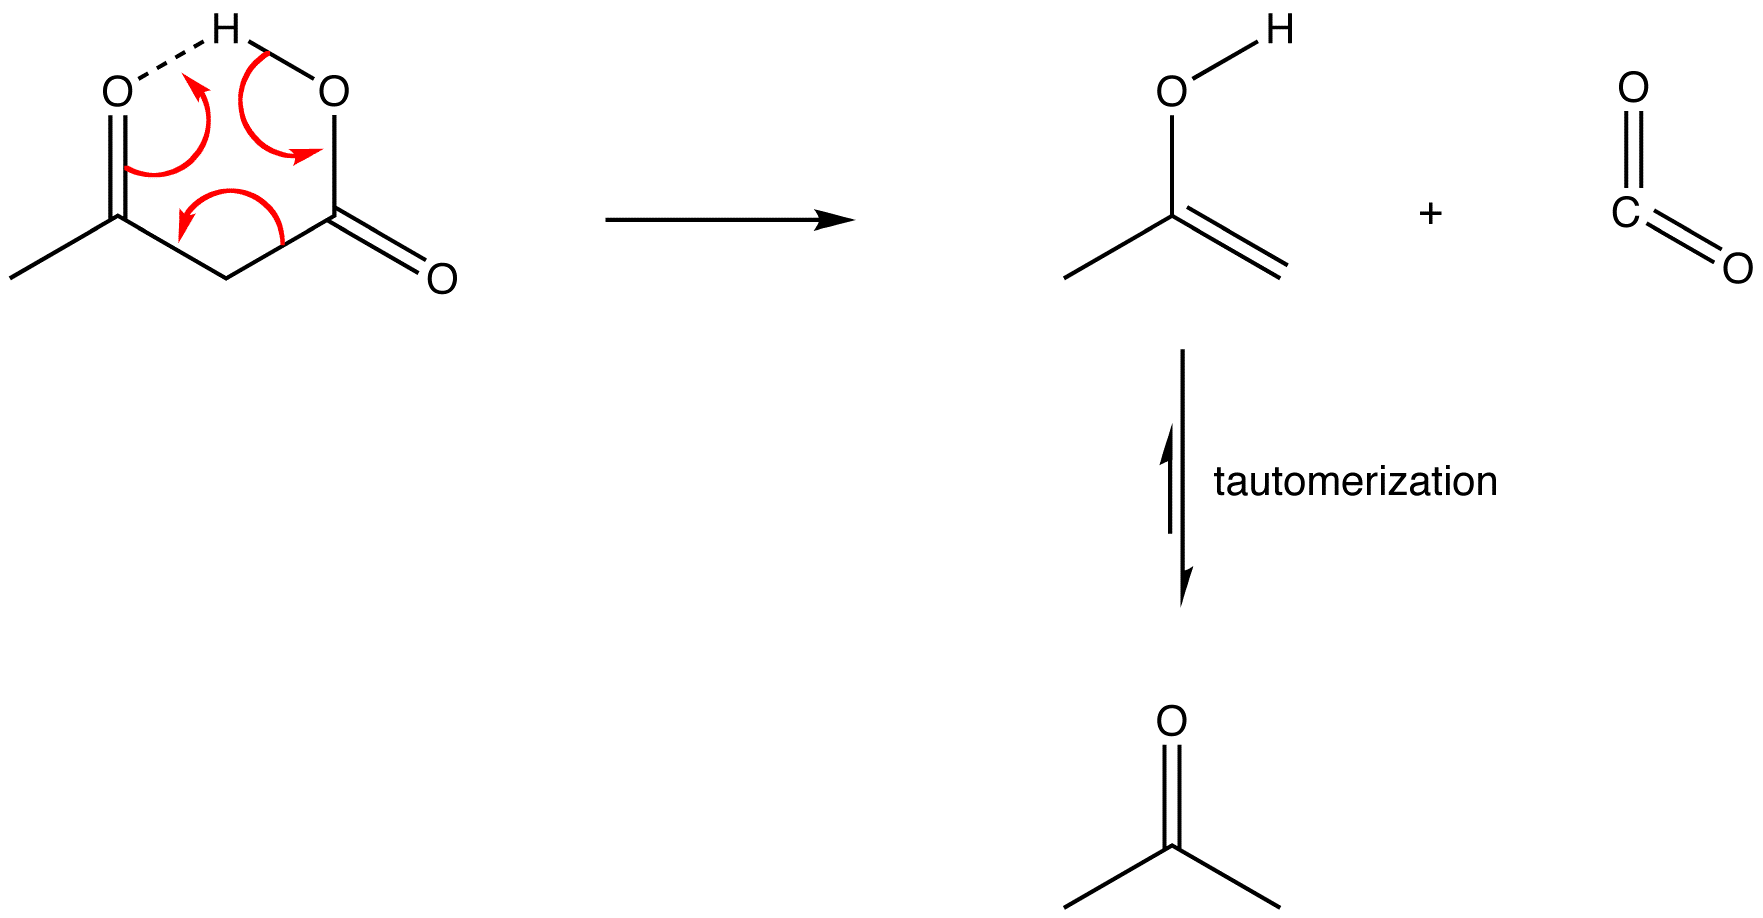 decarboxylation3.png